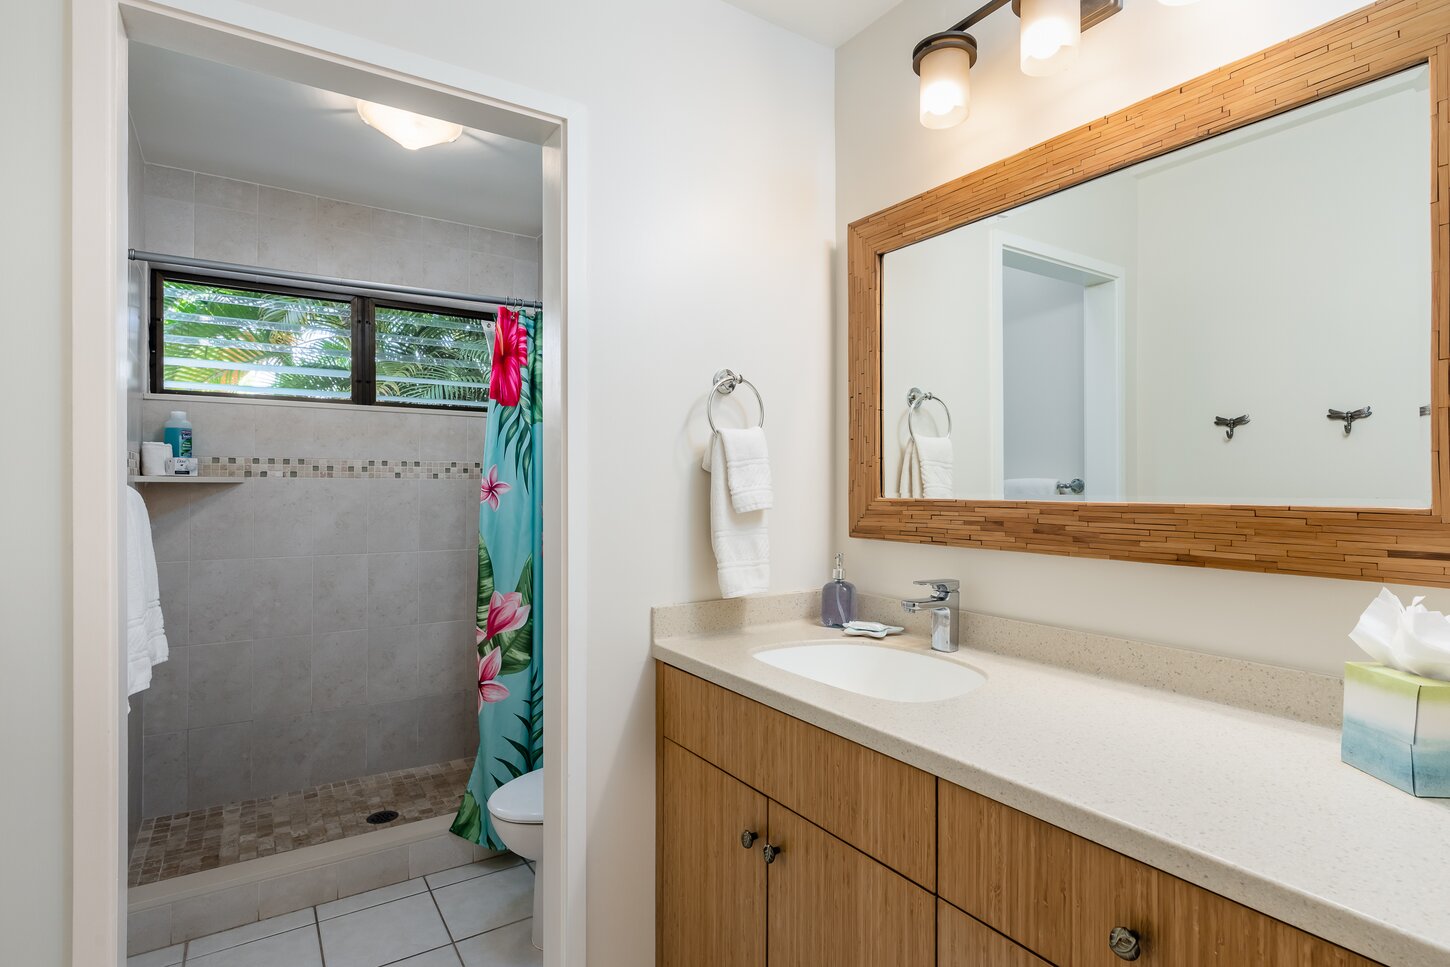 Both baths have plenty of counter and cabinet space as well as a spacious shower. Starter soaps and shampoos are provided to wash the mainland off as soon as you land!